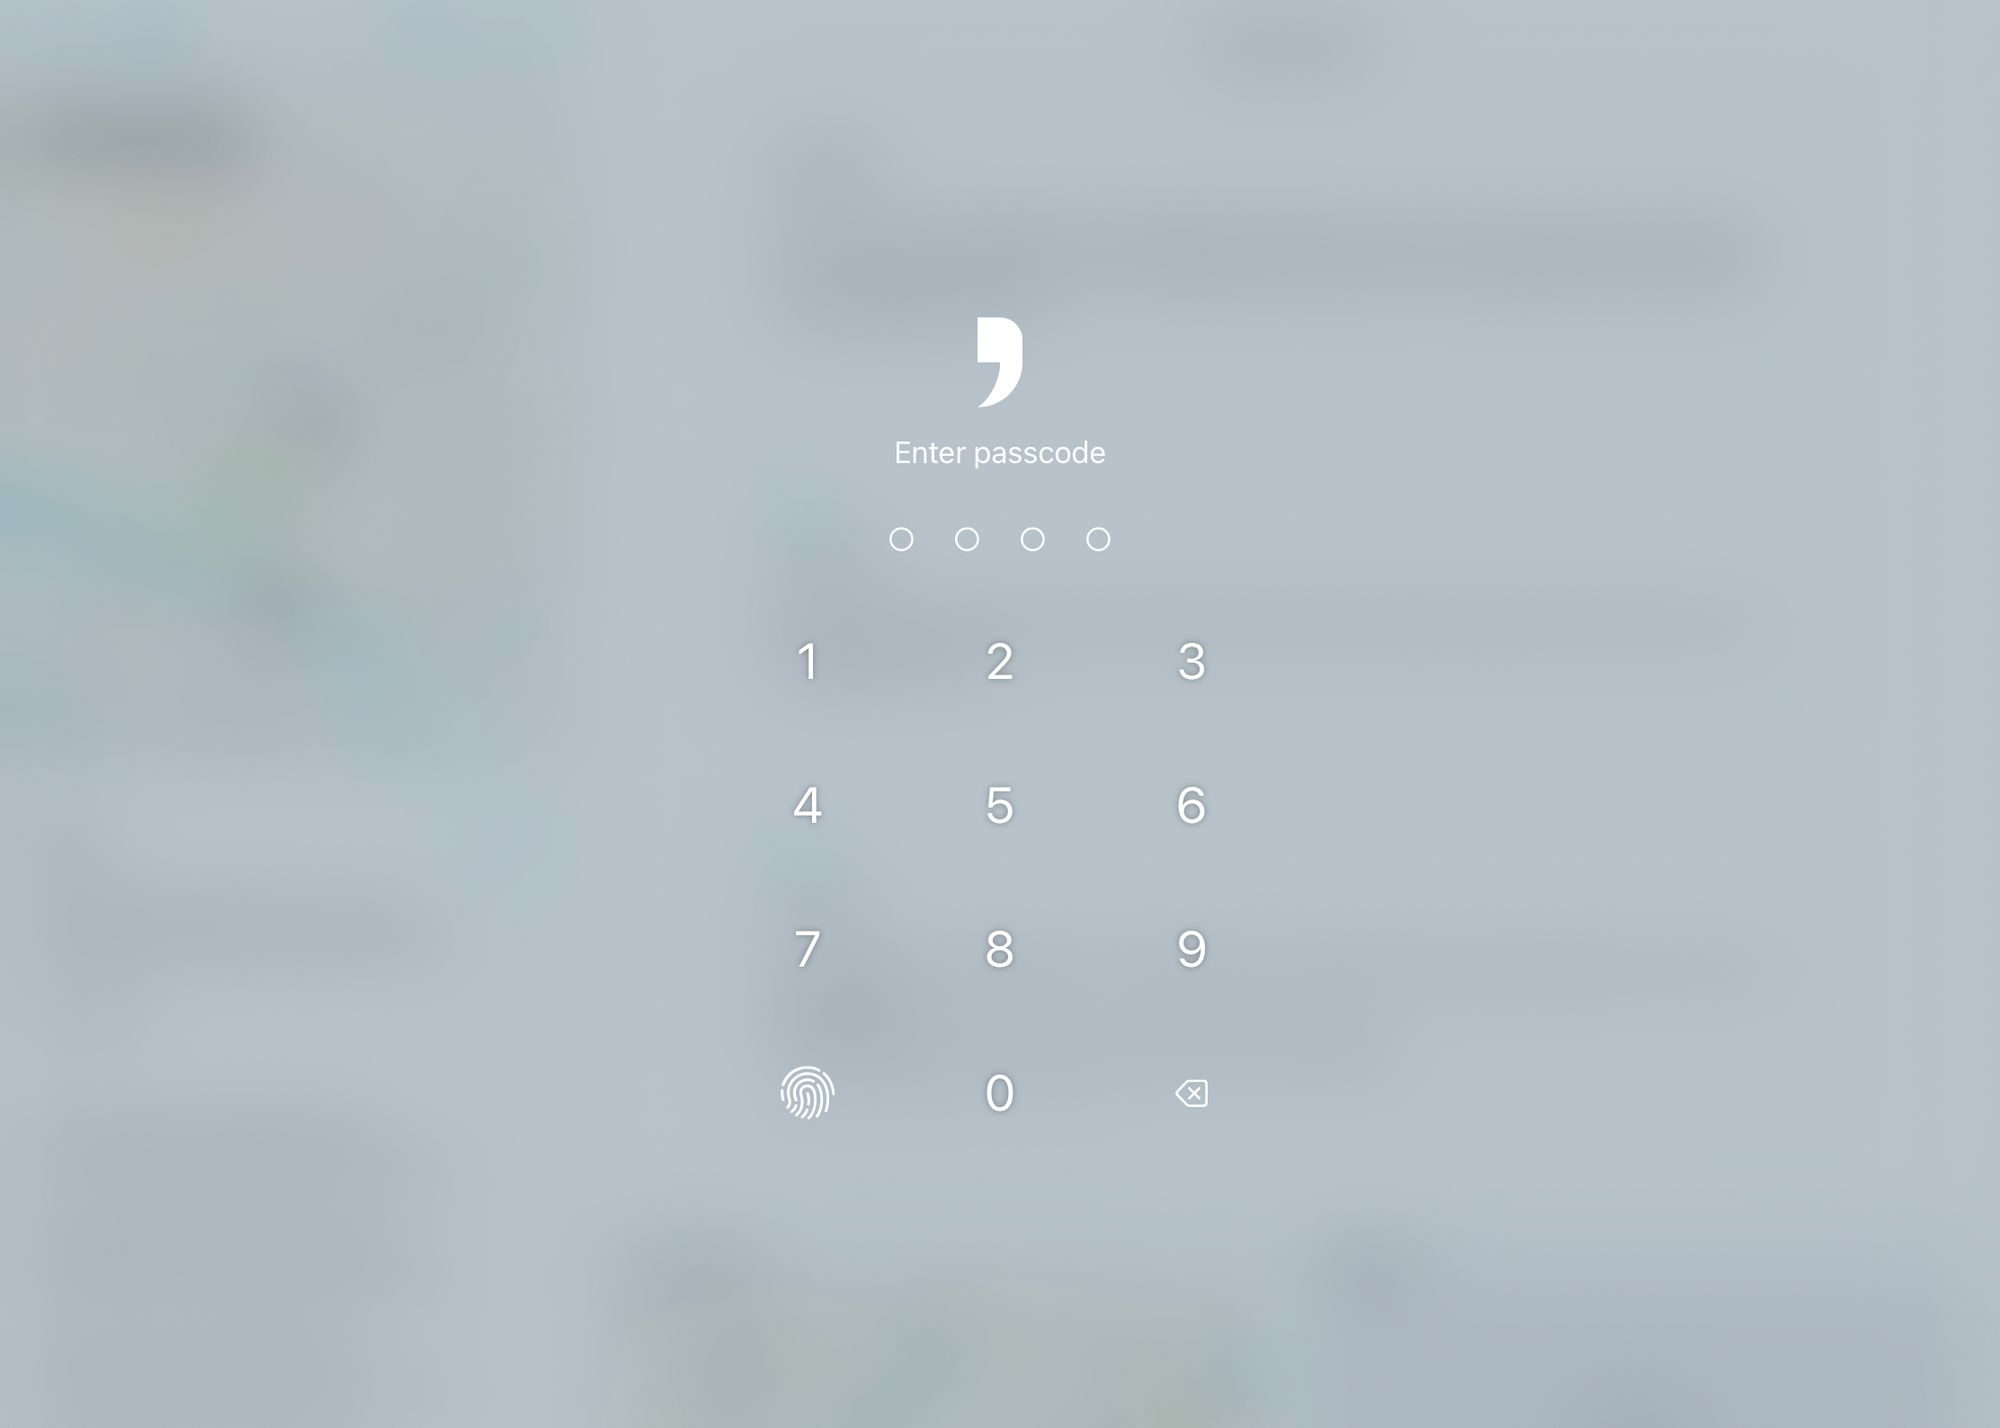 Hibi Journal 1.1 is out with a Passcode Lock feature